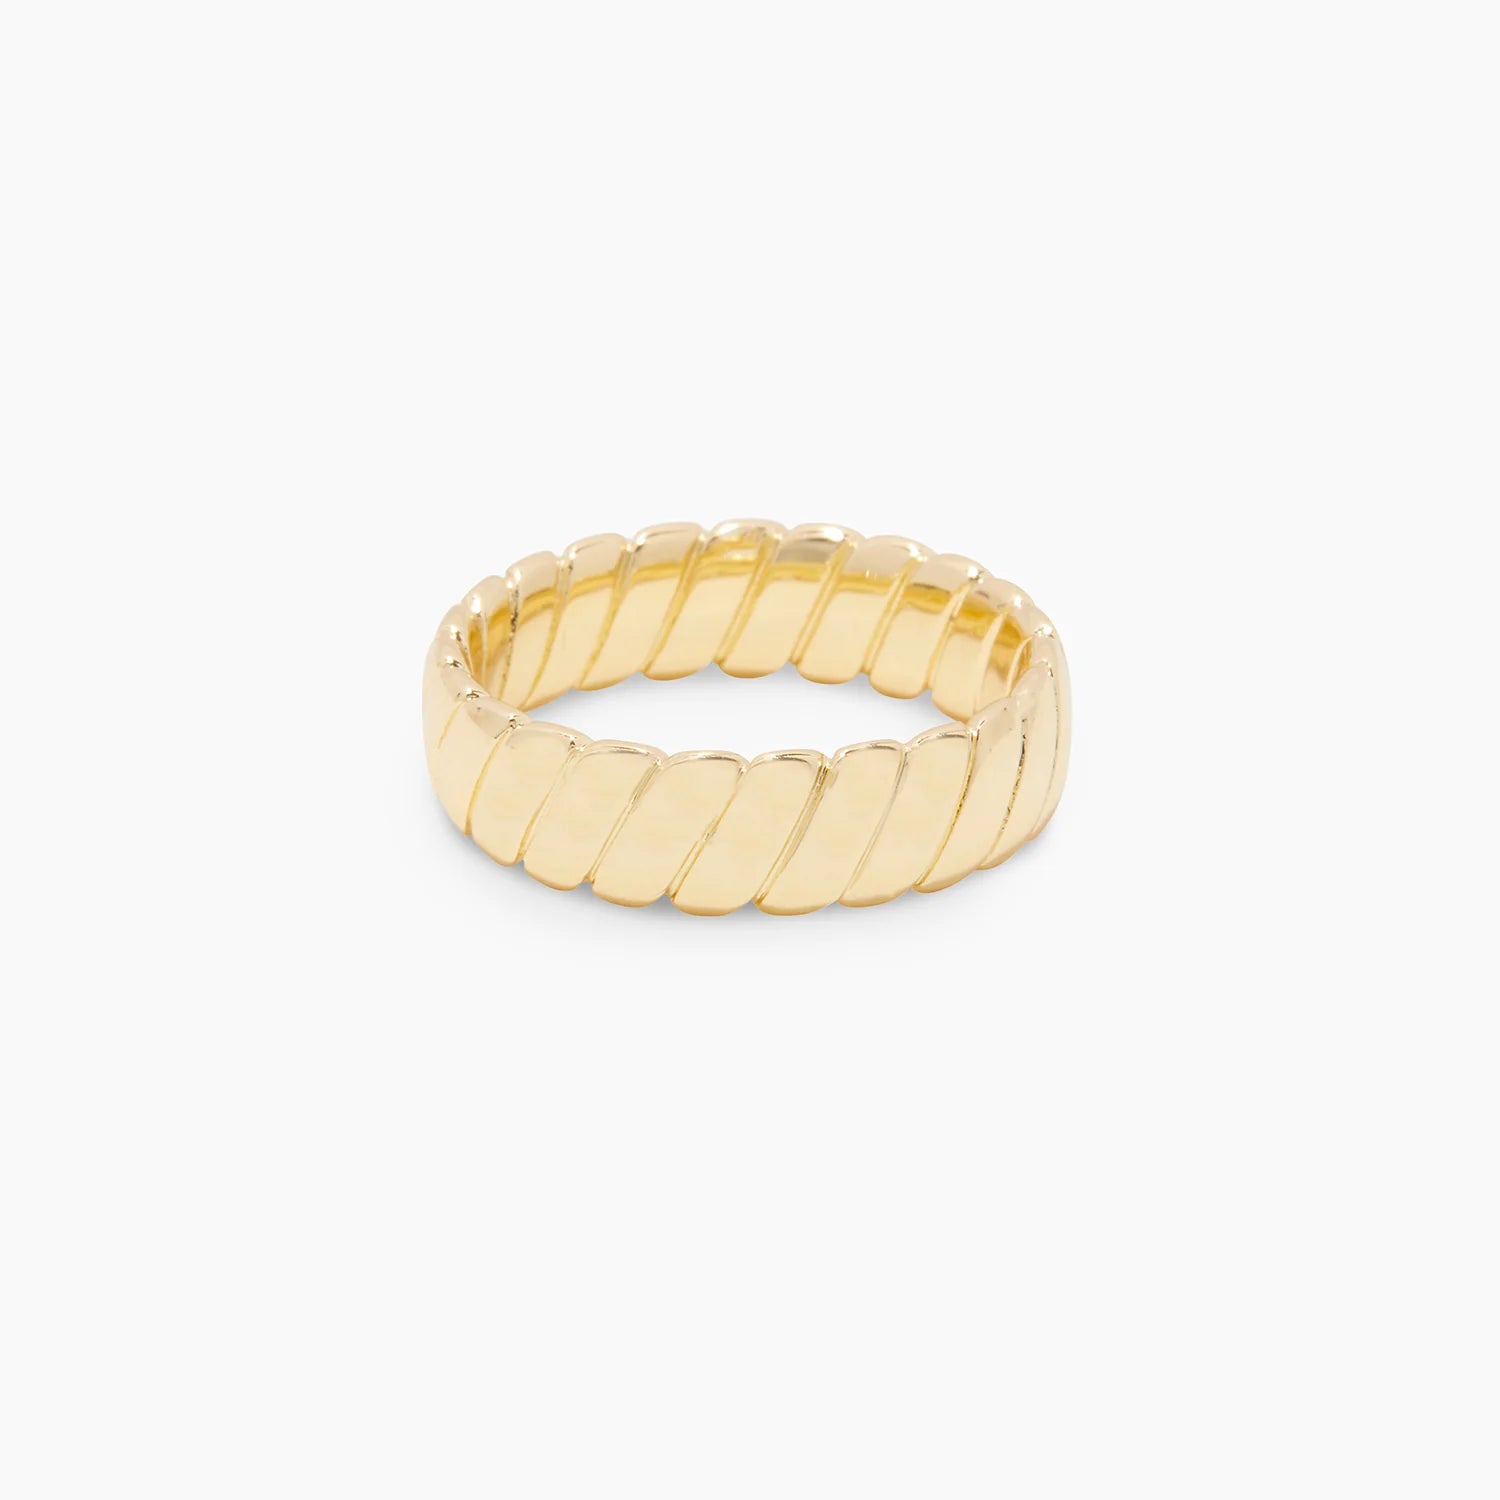 The Gorjana Laney Ring is 18K gold plated brass, giving it a bold, timeless style. Its wide band design makes it the perfect statement piece, and its stackable function gives endless styling possibilities. This stylish piece is from renowned designer Gorjana, making it a perfect addition to any wardrobe.